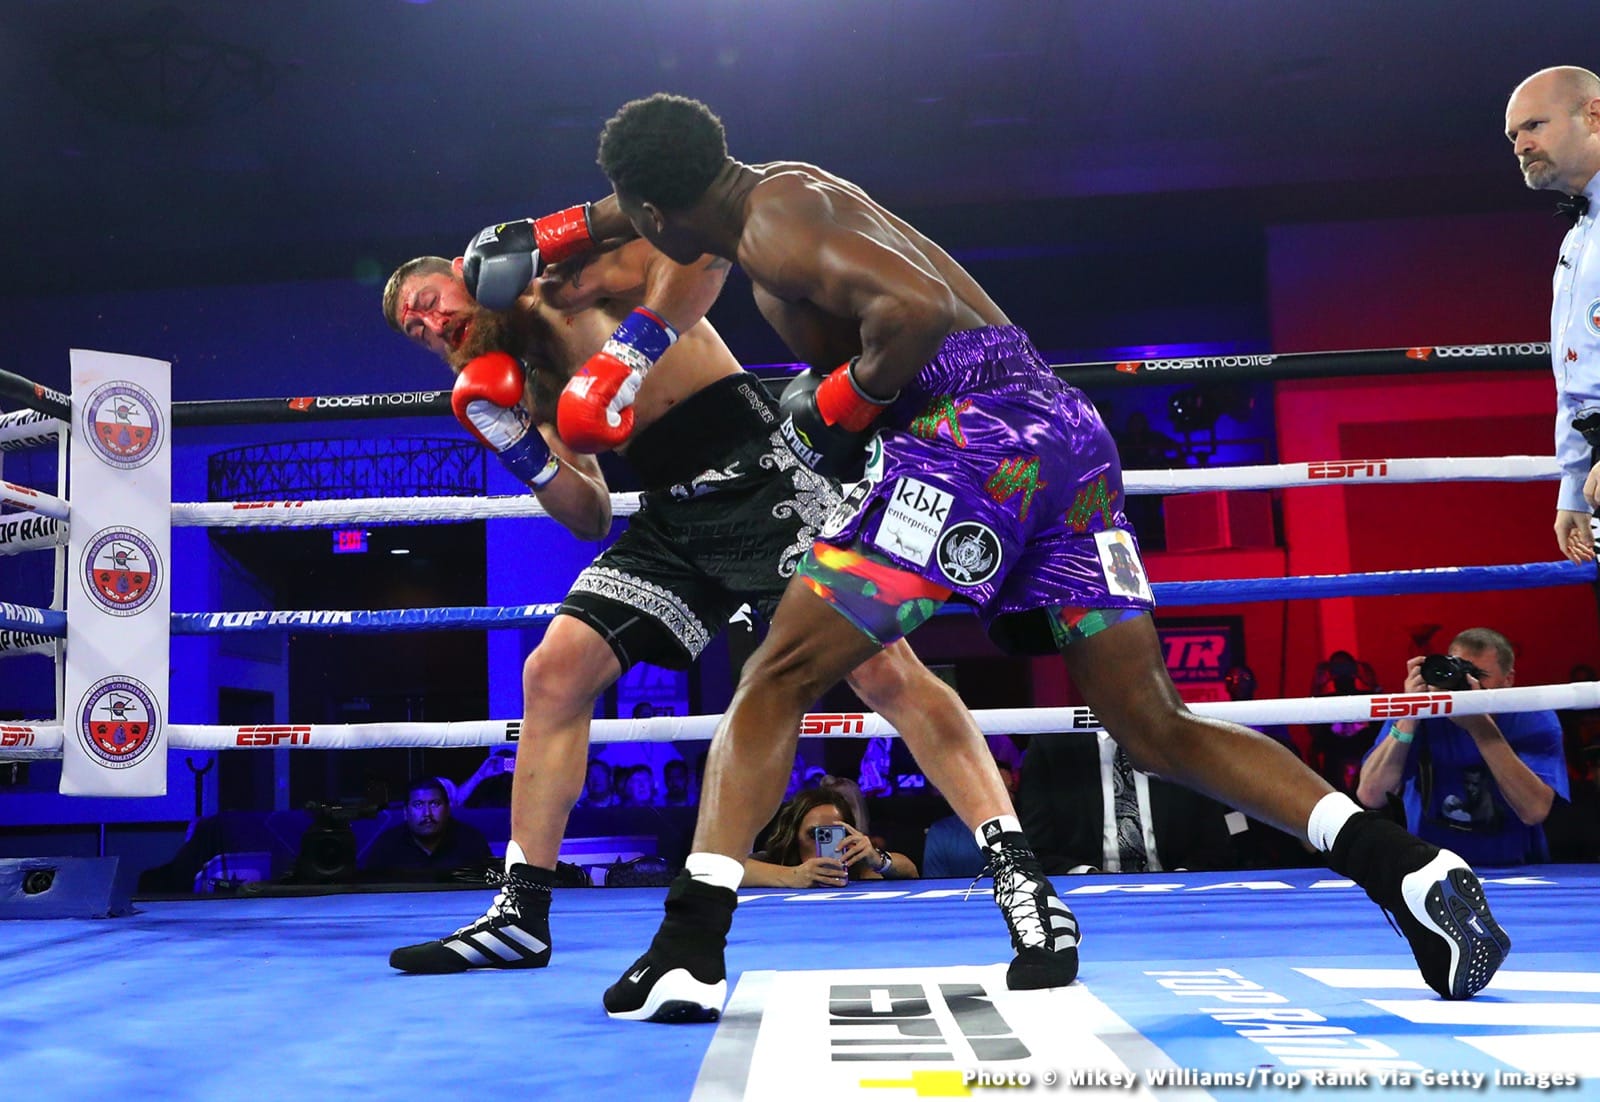 Isaac Dogboe Outpoints Gonzalez - Boxing Results